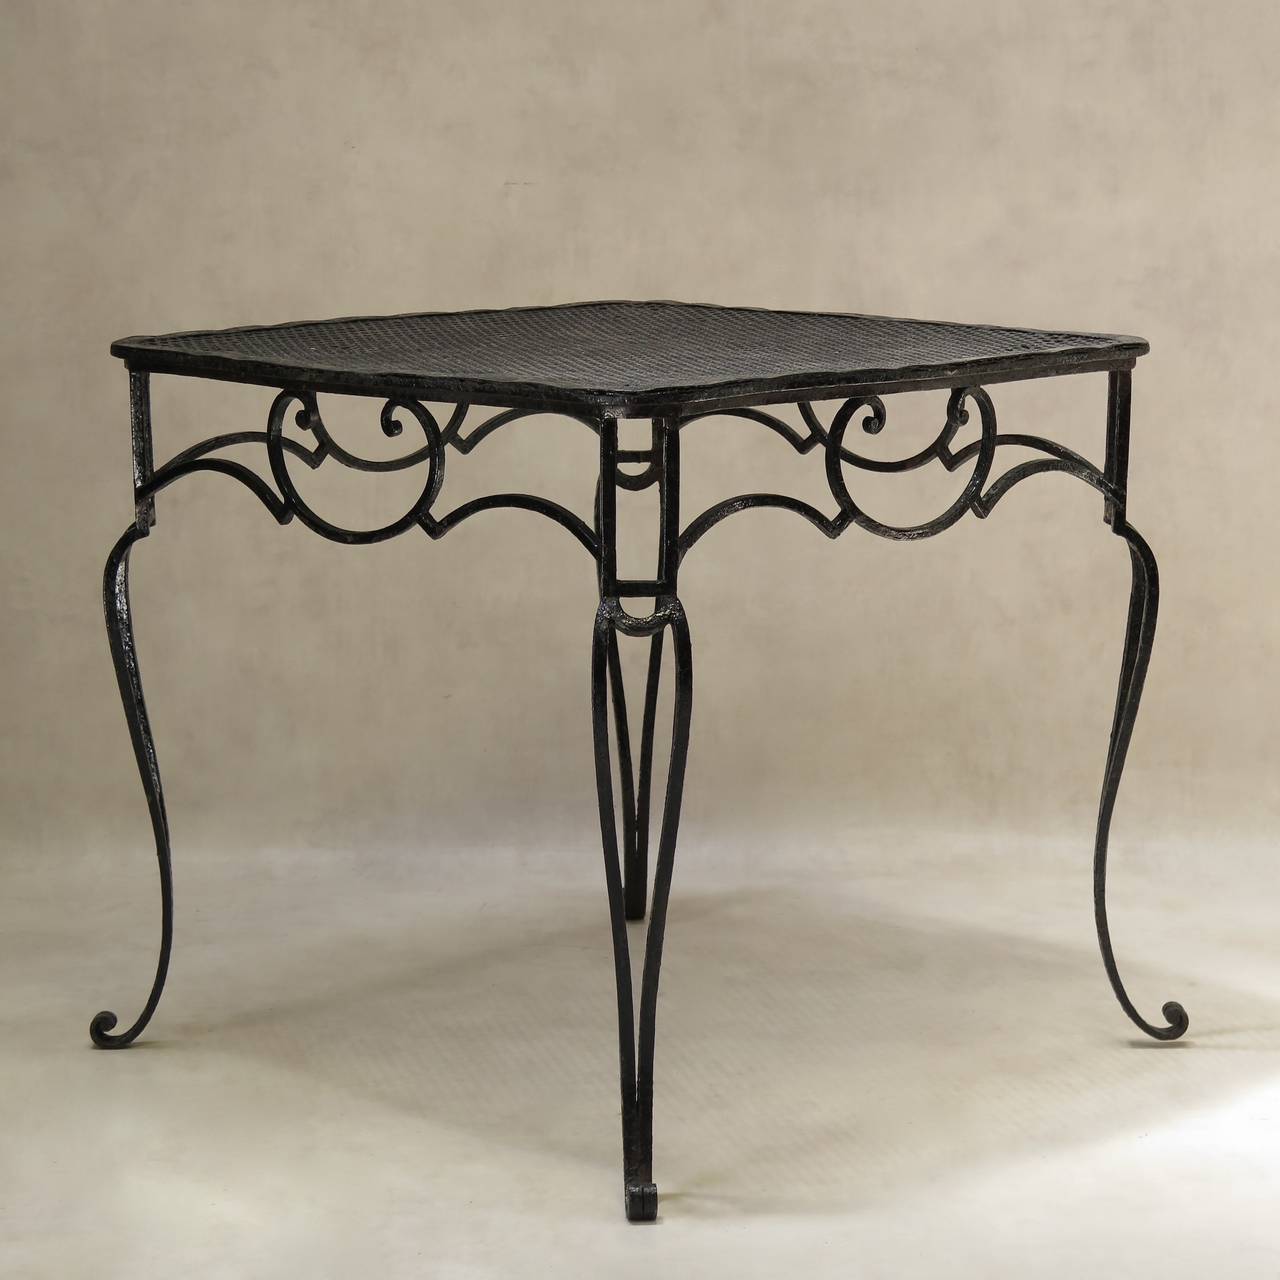 Elegant wrought-iron dining table of baroque inspiration. The square top has serpentine edges and is made of perforated sheet metal. Shapely apron and cabriole legs ending in scrolled feet. Original glossy black paint. Works well indoors or